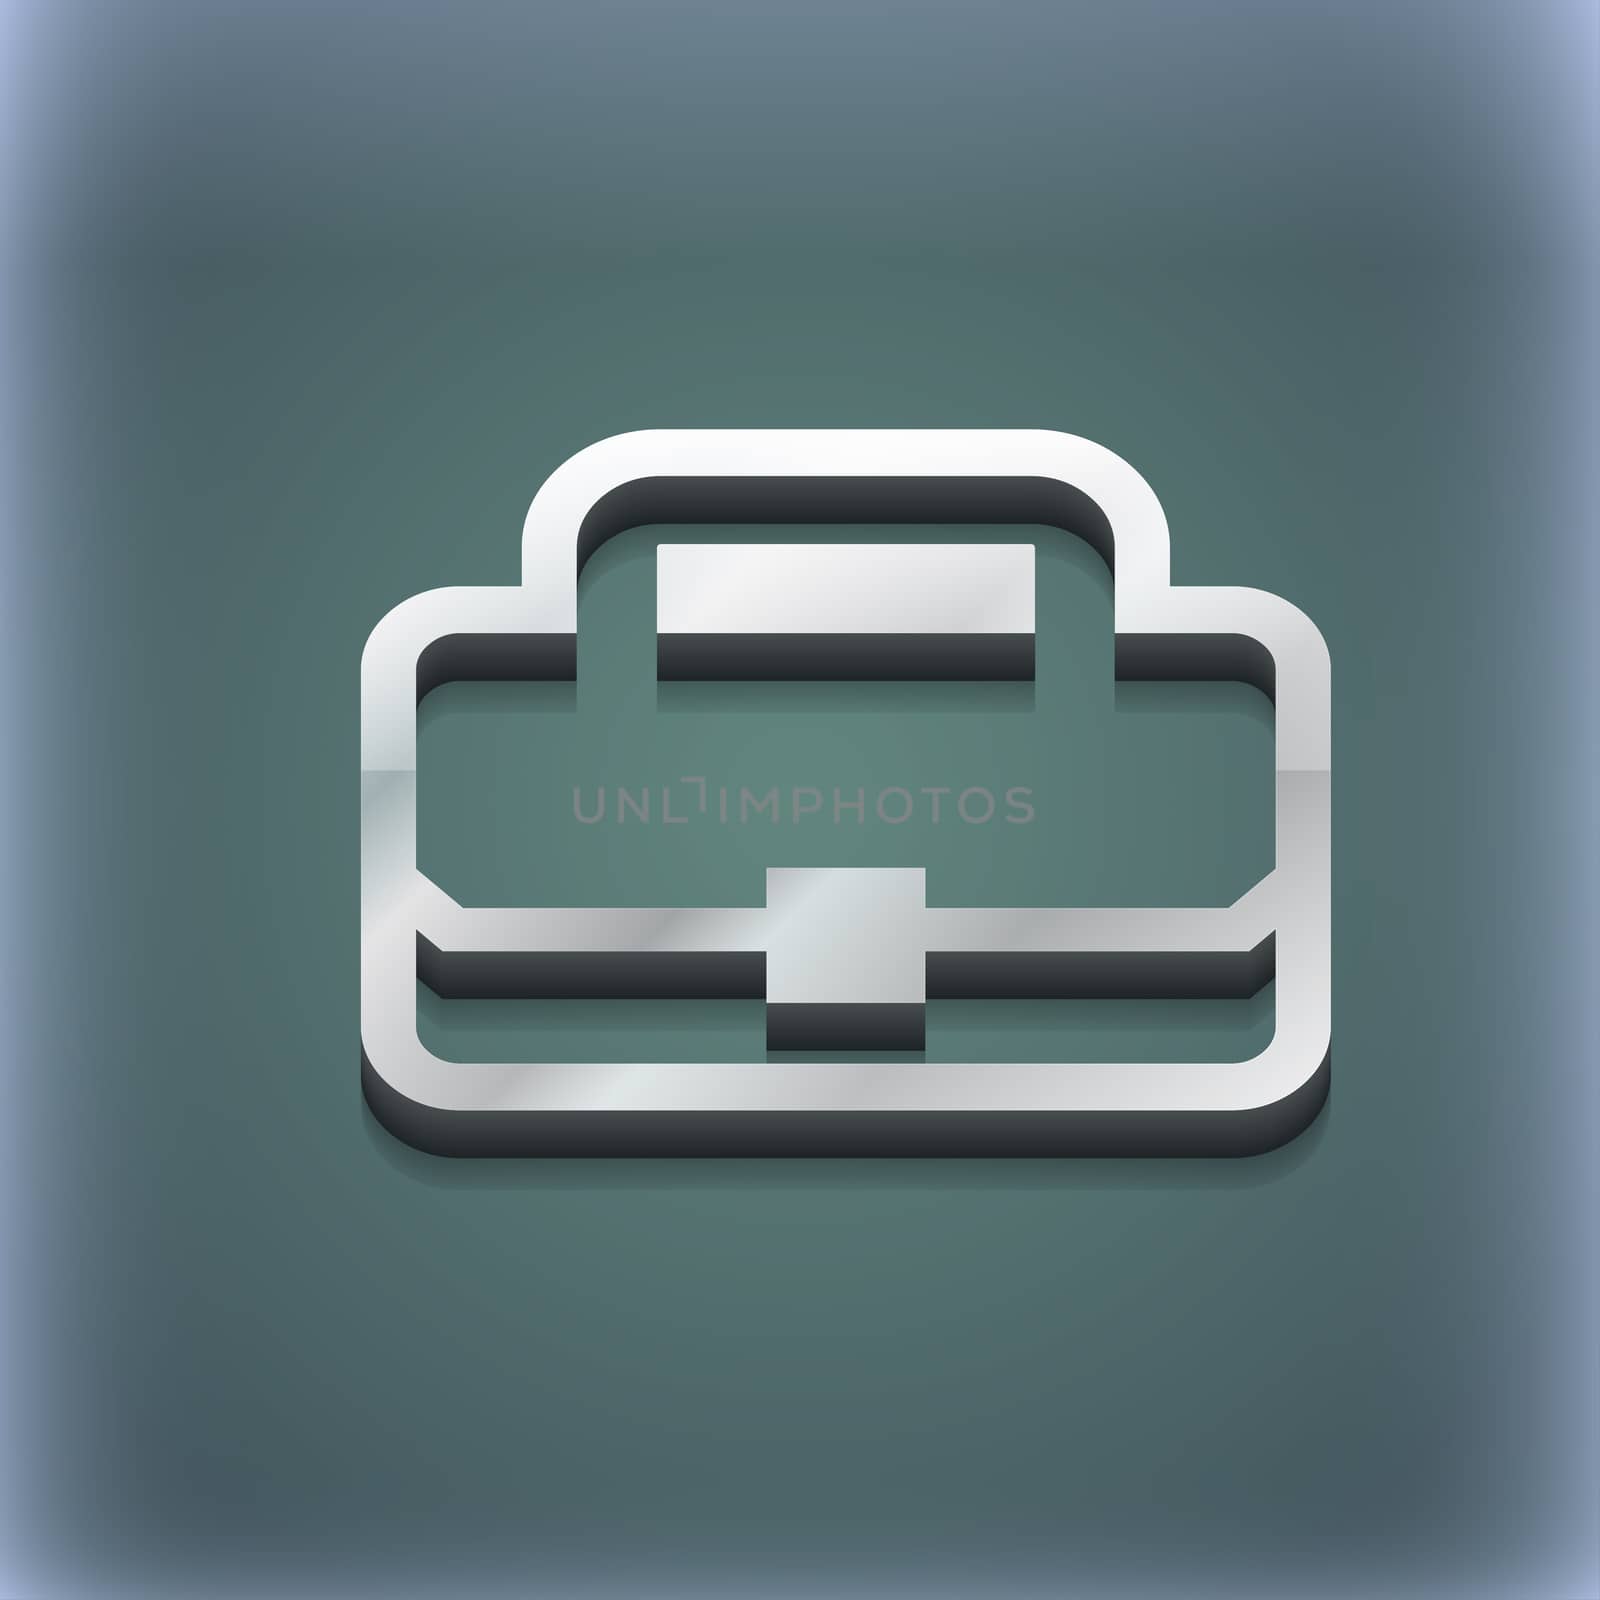 Briefcase icon symbol. 3D style. Trendy, modern design with space for your text illustration. Raster version